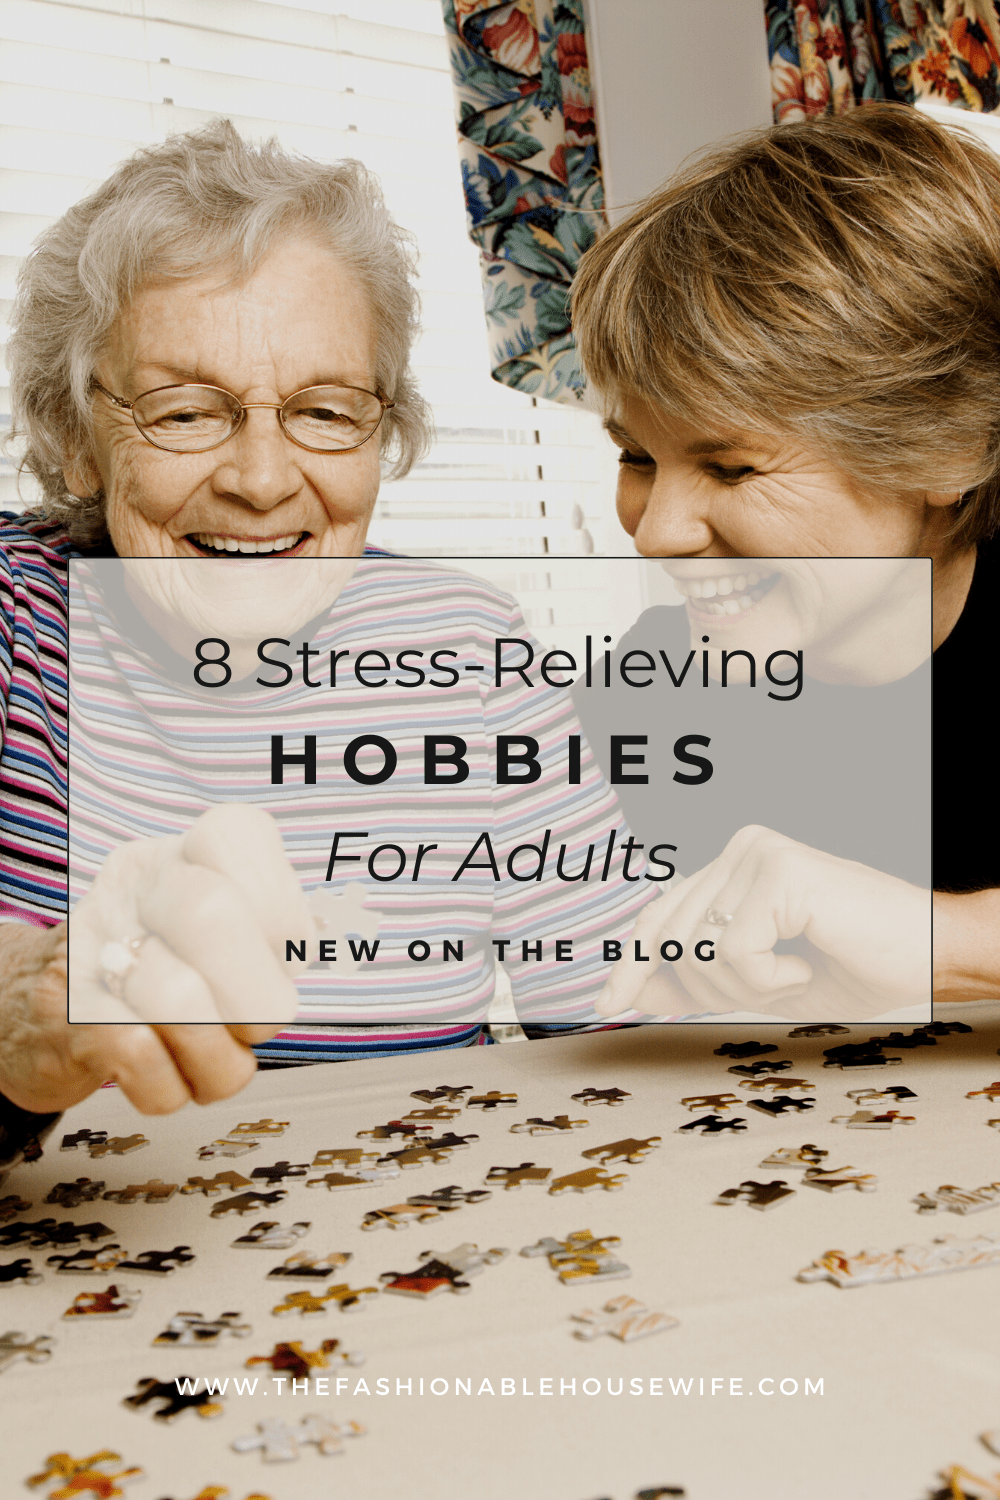 8 Stress-Relieving Hobbies For Adults • The Fashionable Housewife